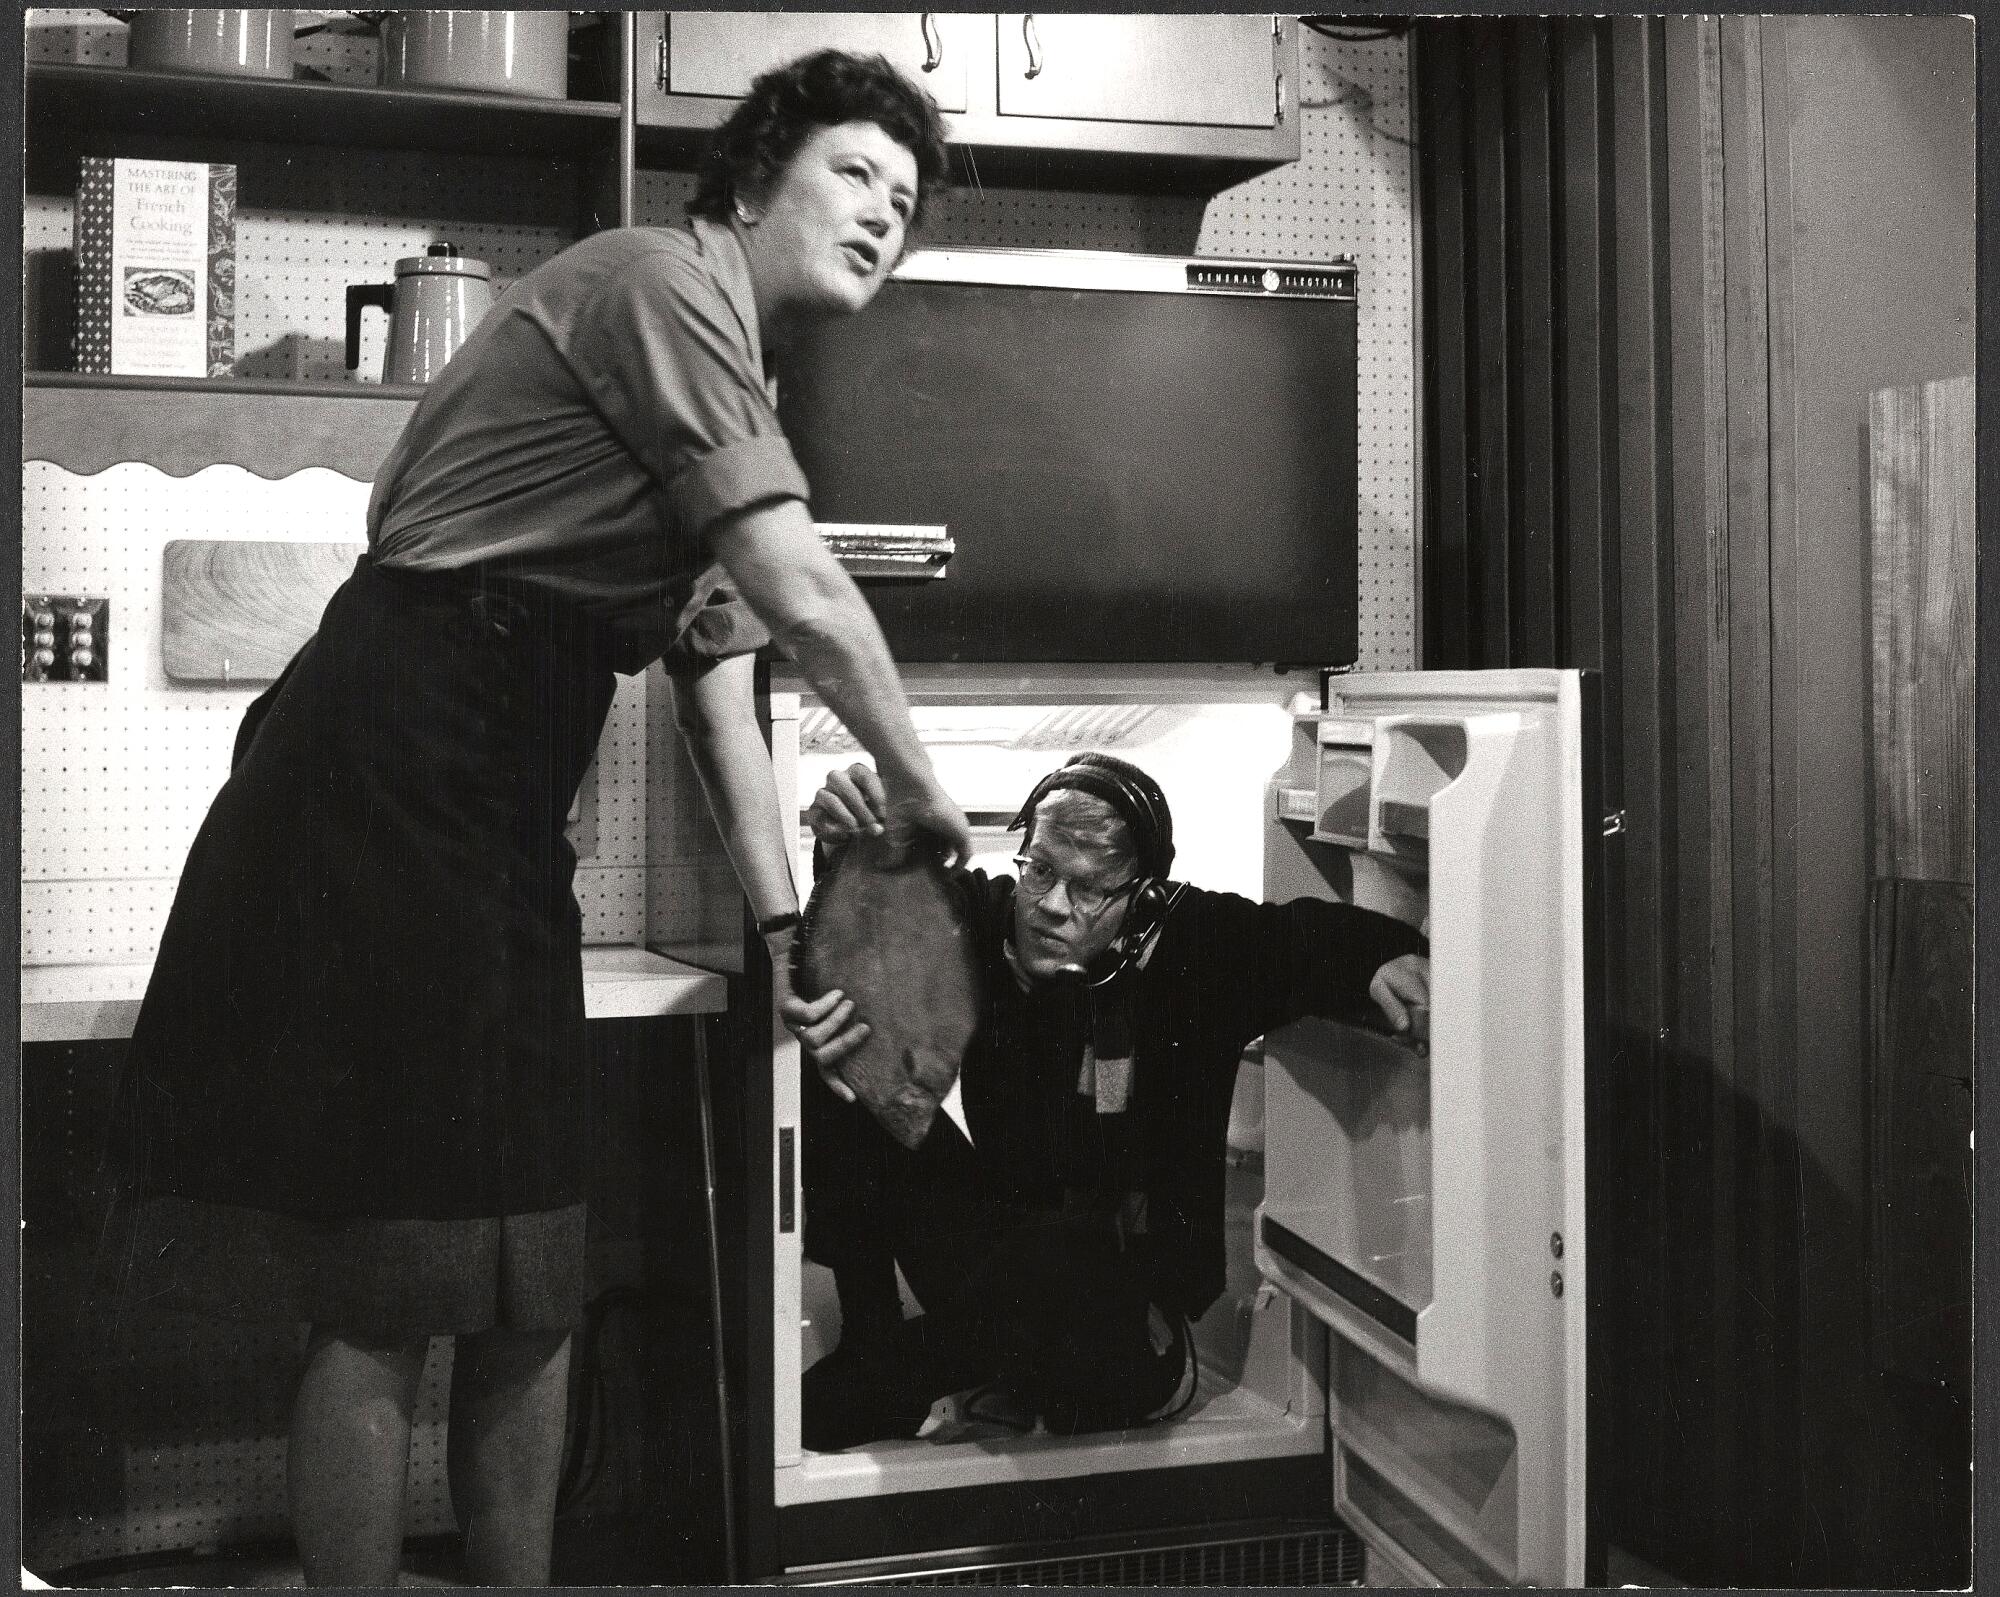 Julia Child retrieving fish from a crew member in a refrigerator, as seen in the documentary "Julia."